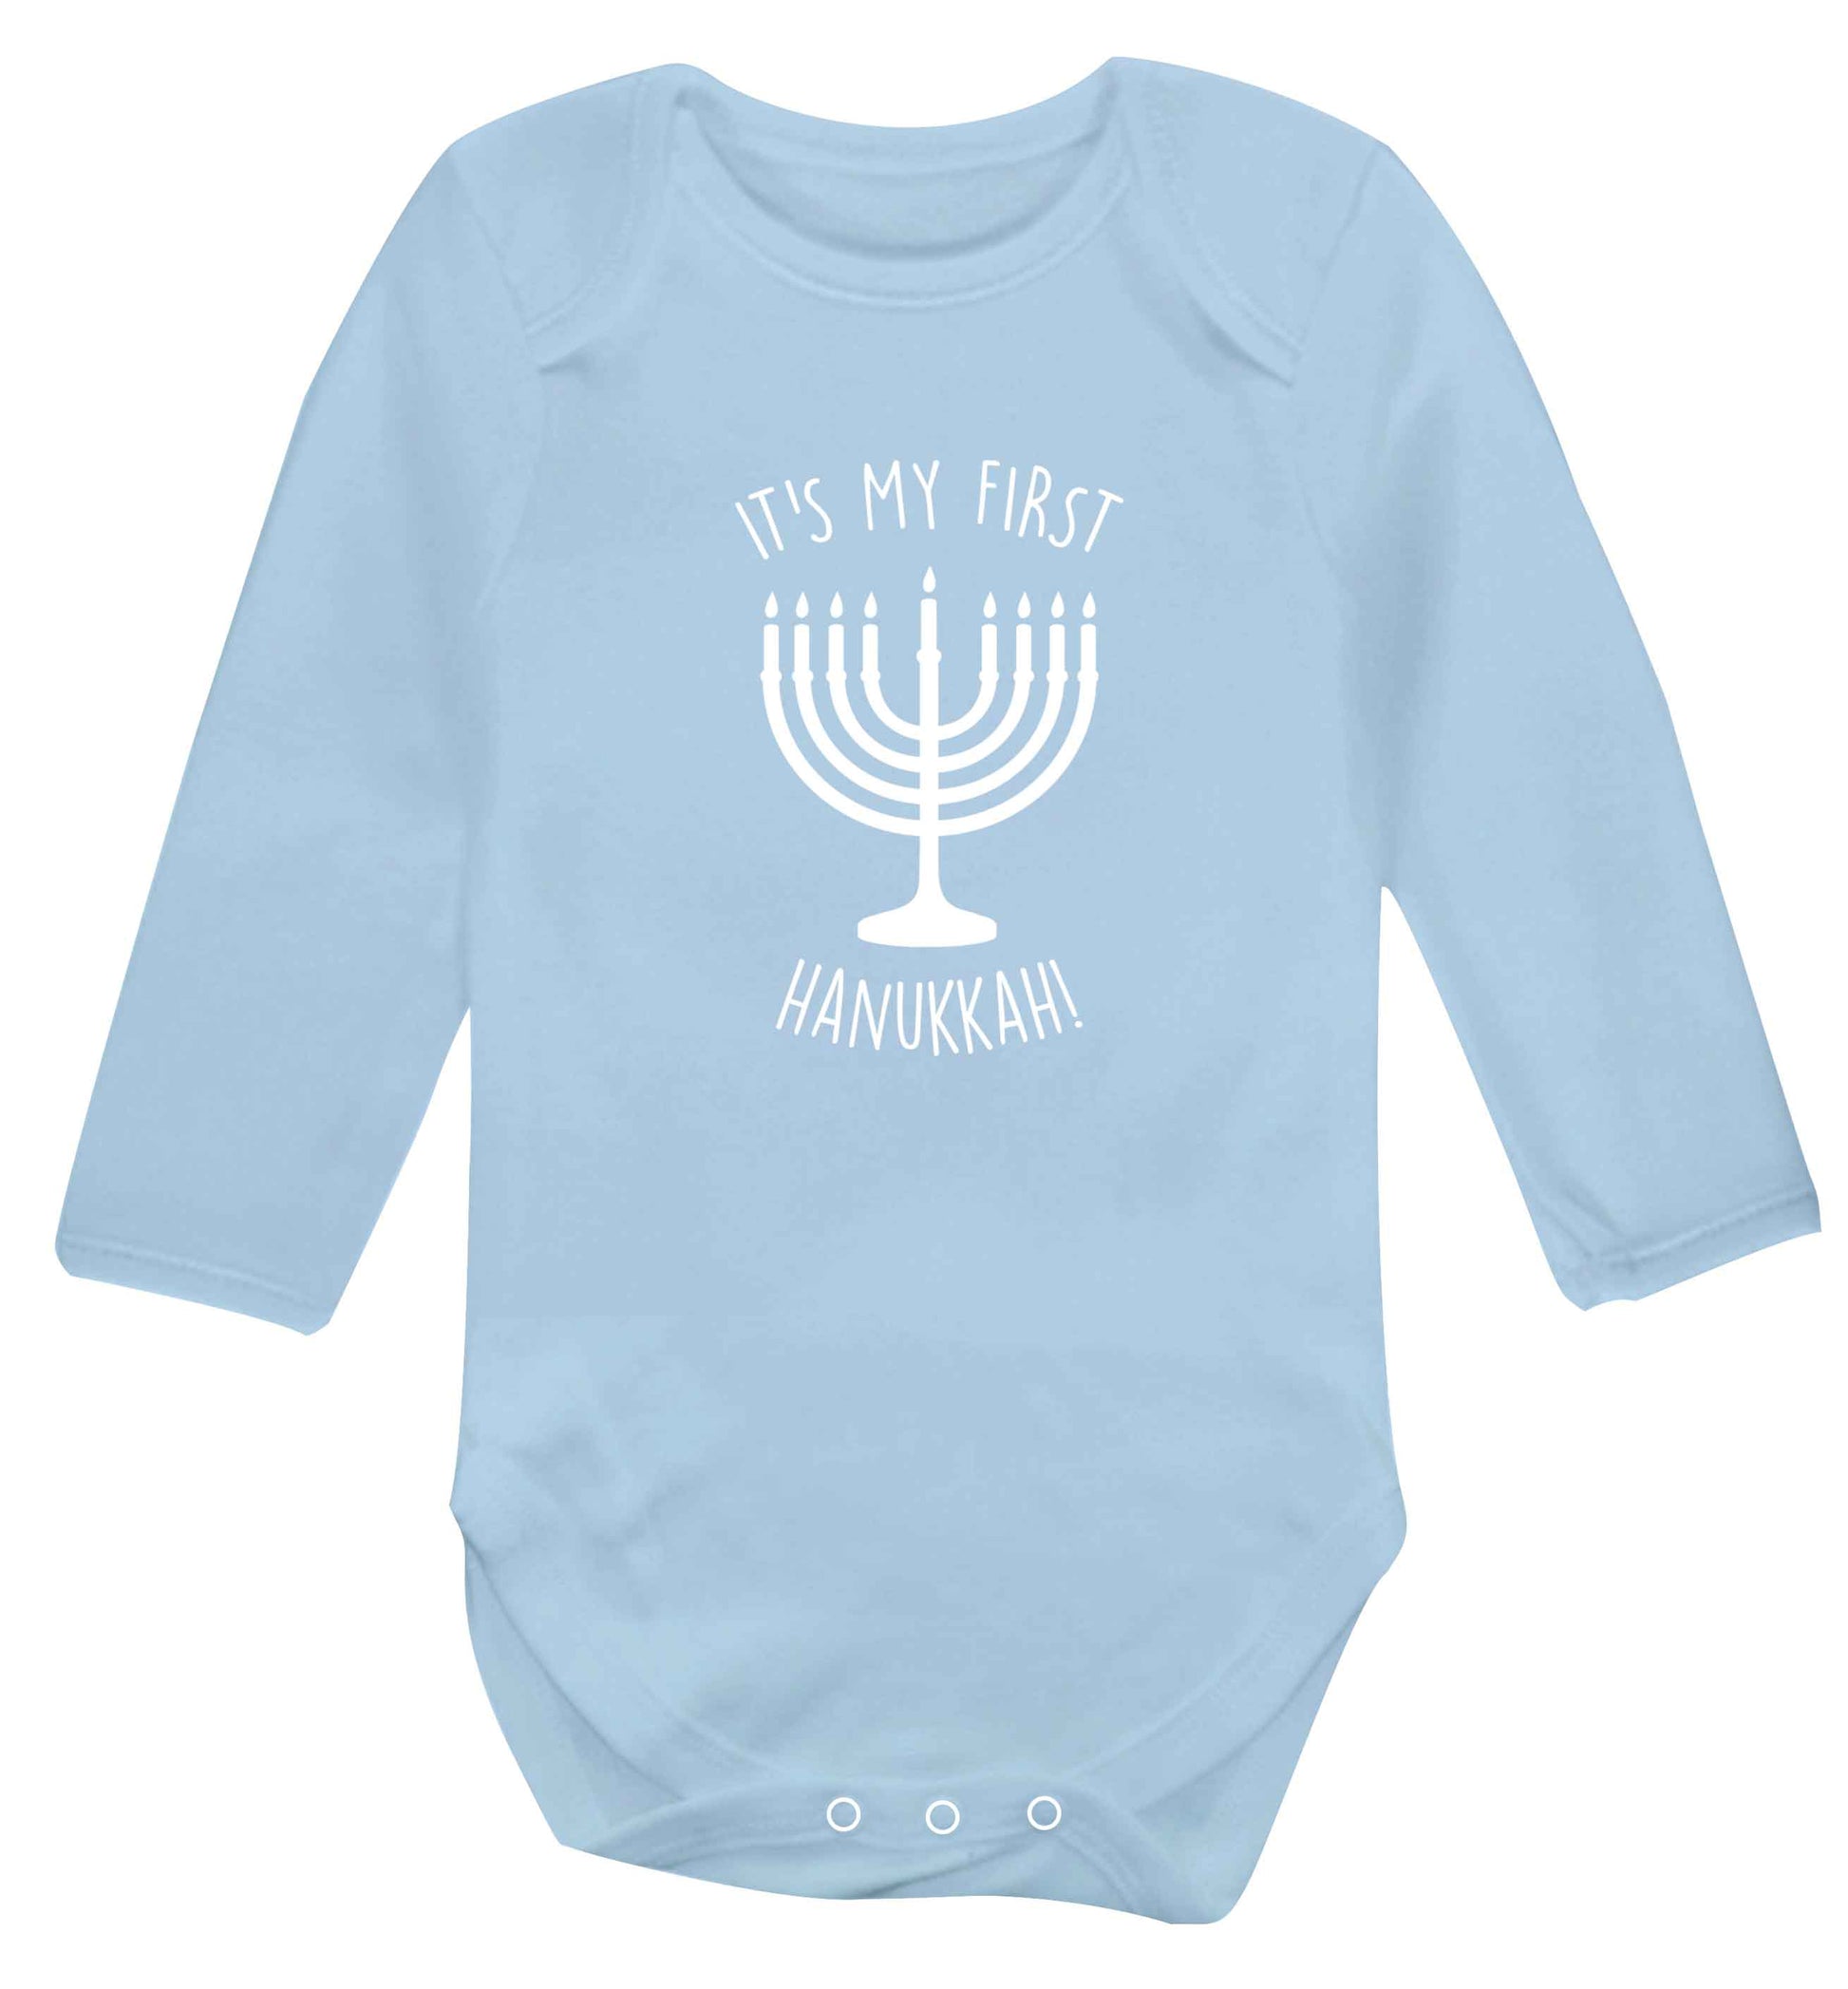 It's my first hanukkah baby vest long sleeved pale blue 6-12 months